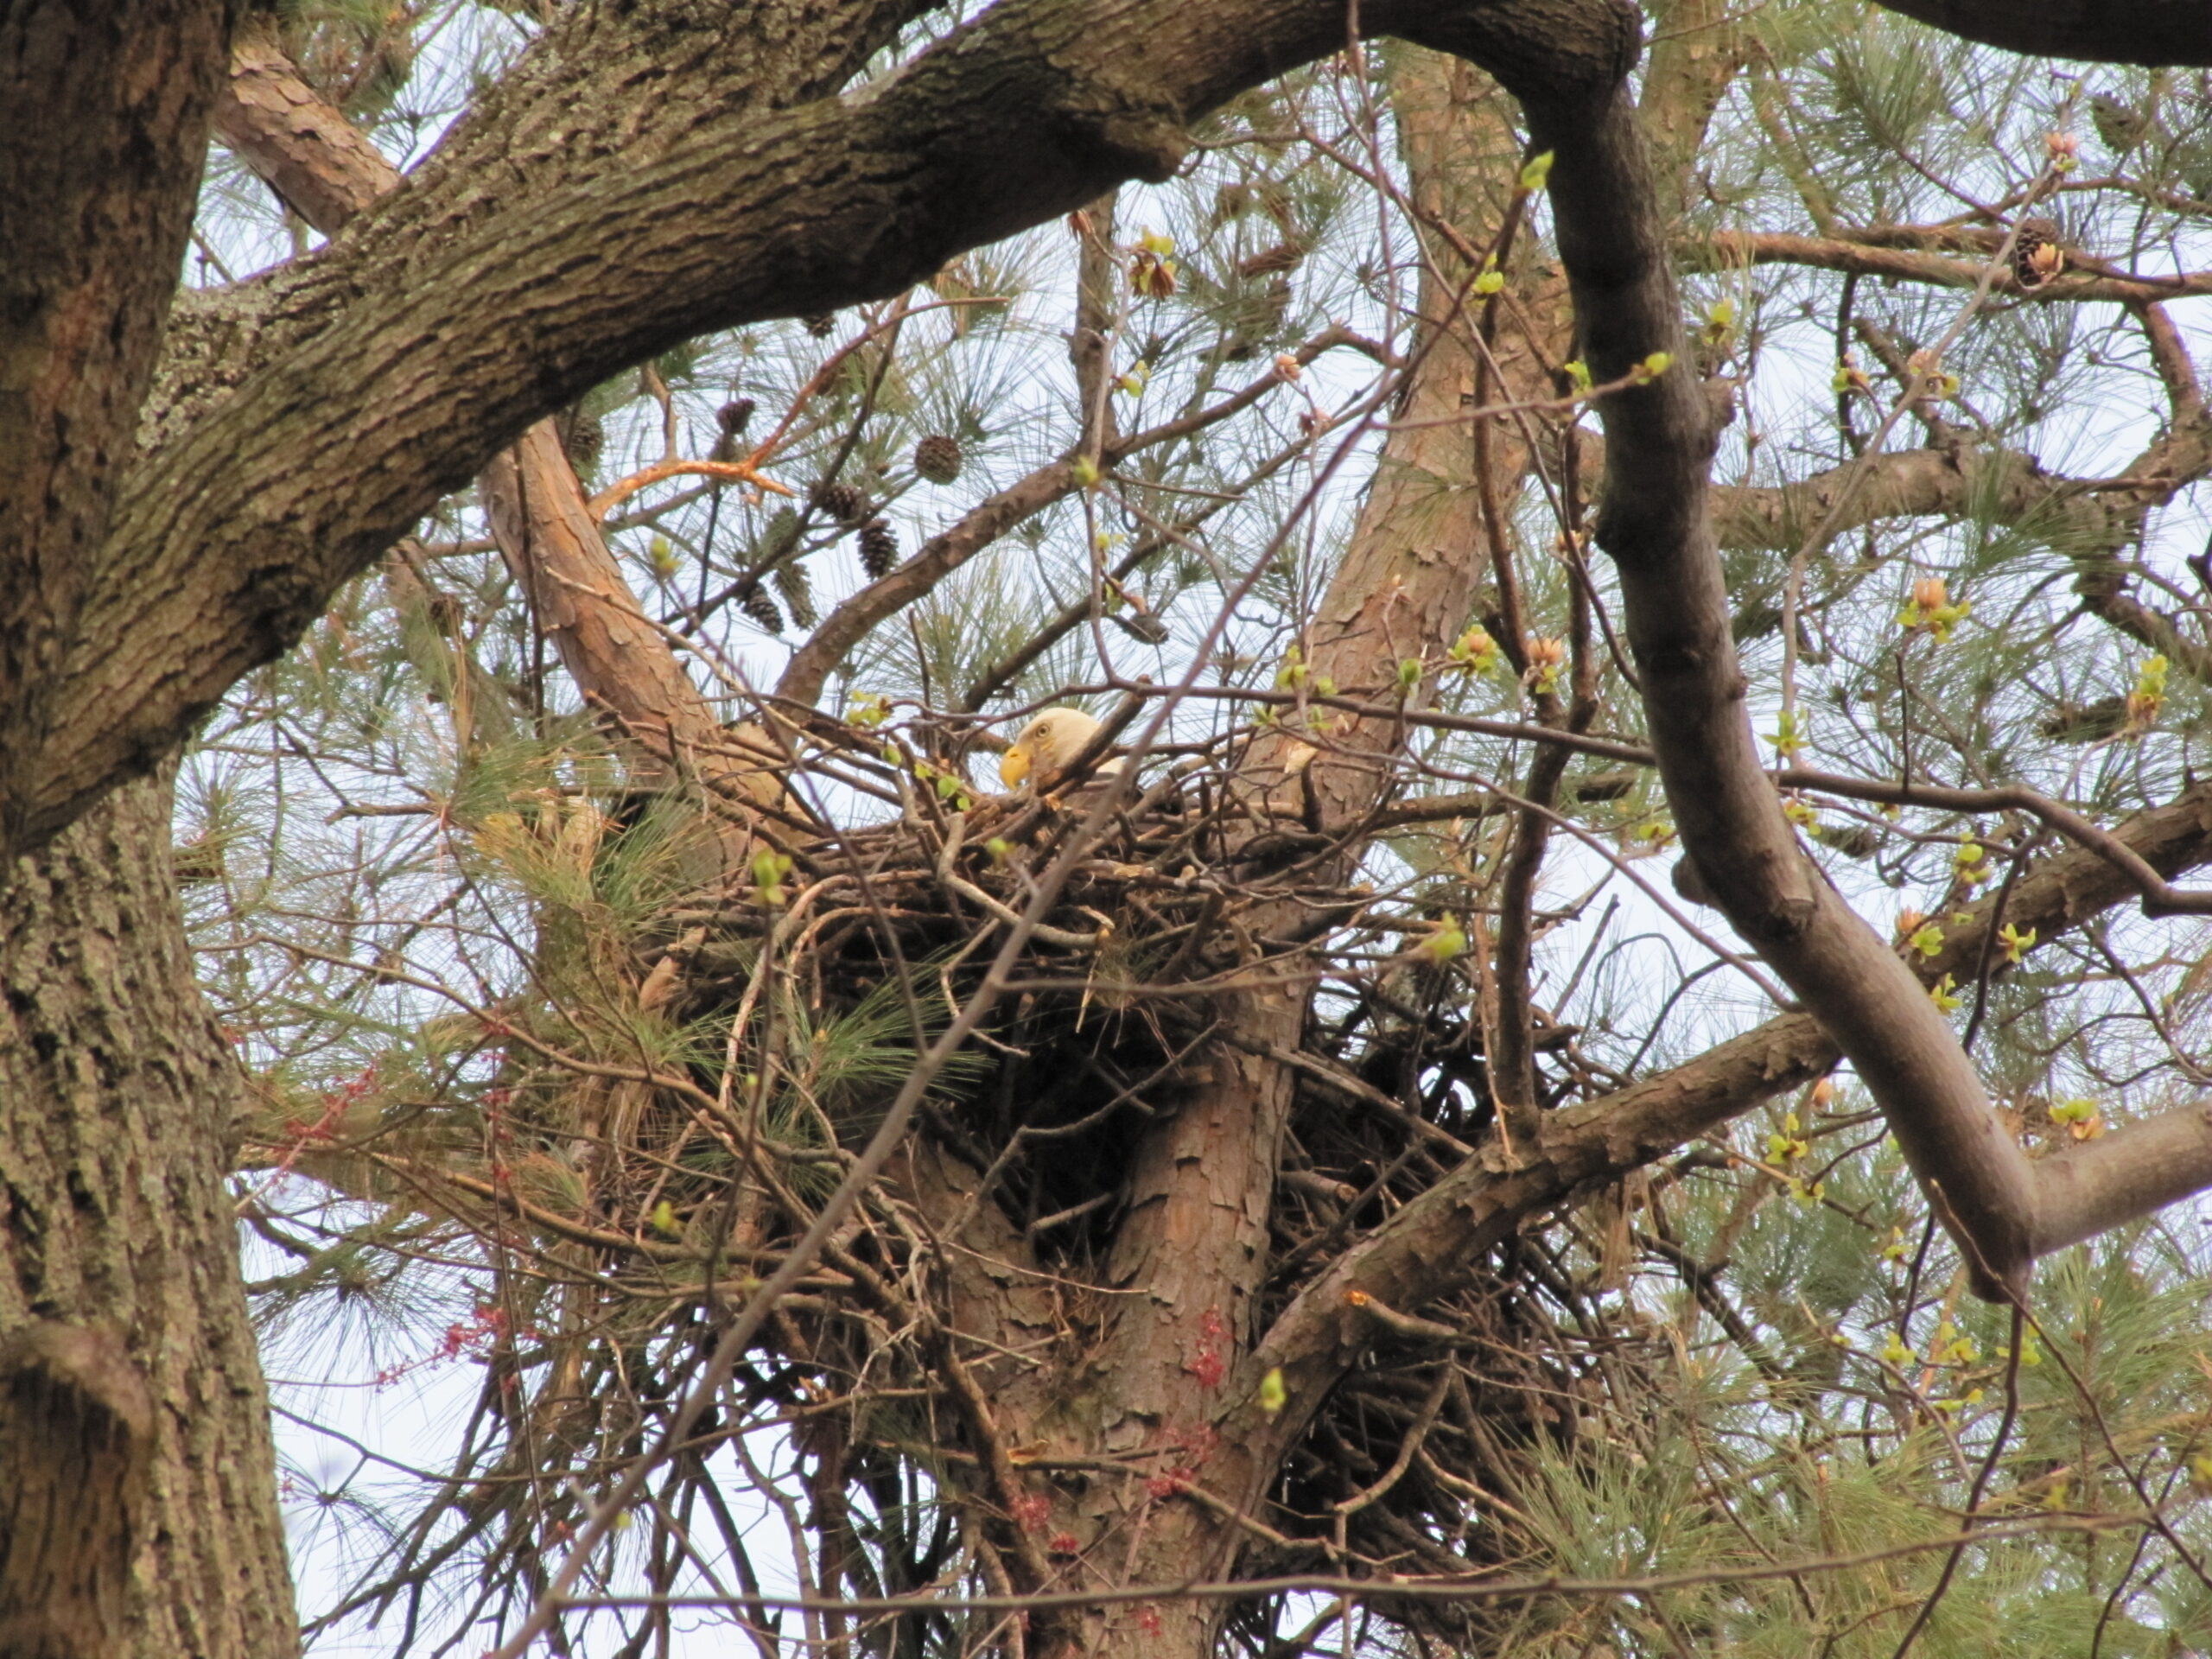 A large stick nest is wedged into the fork of a pine tree. An adult Bald Eagle's head can be seen looking out of the nest.